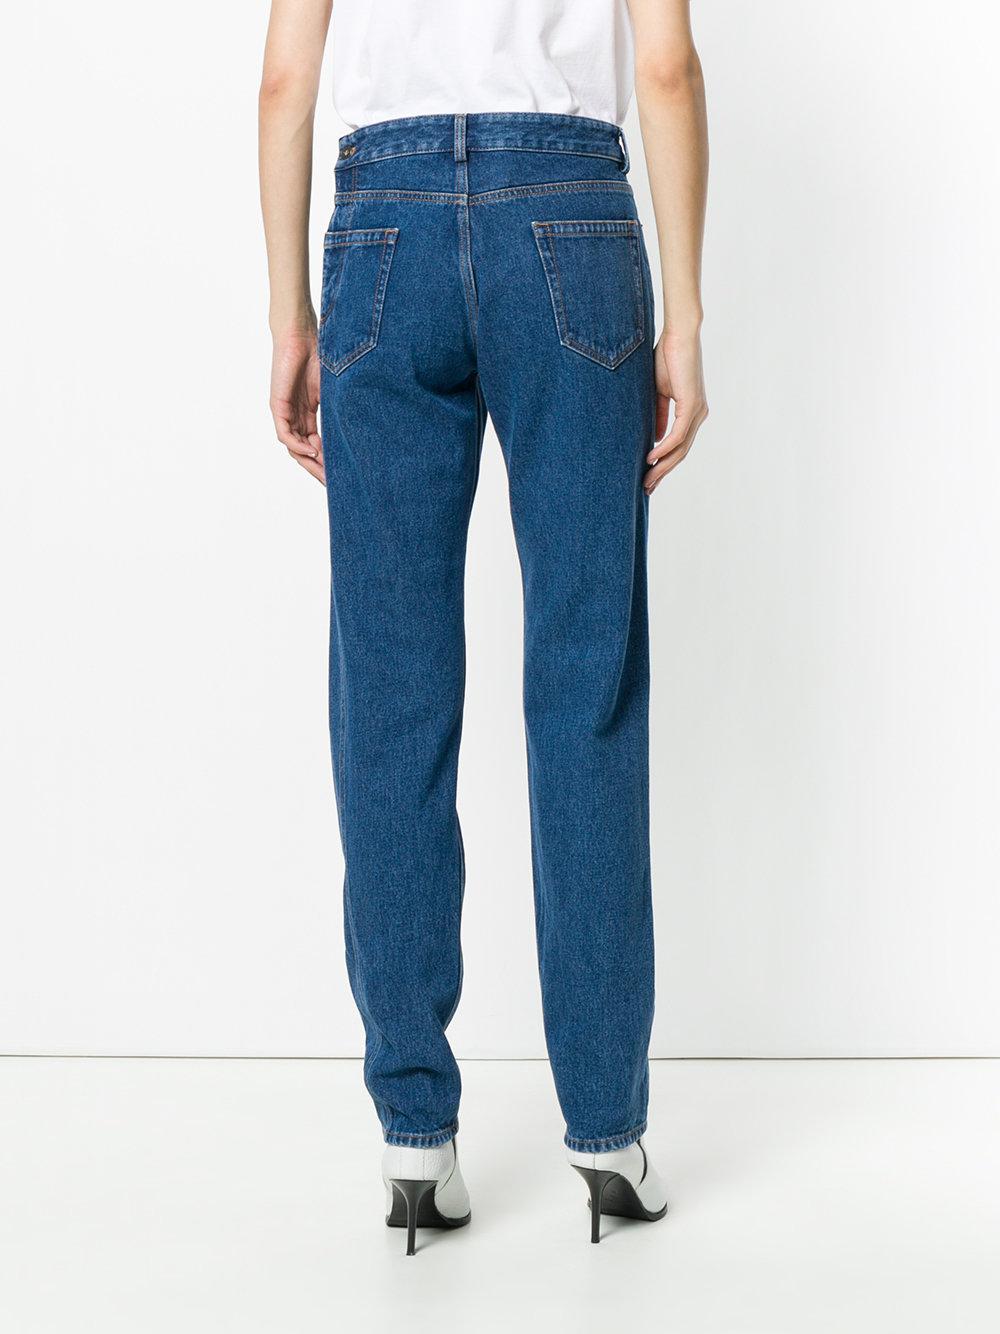 Y. Project Denim Reconstructed Straight Leg Jeans in Blue - Lyst